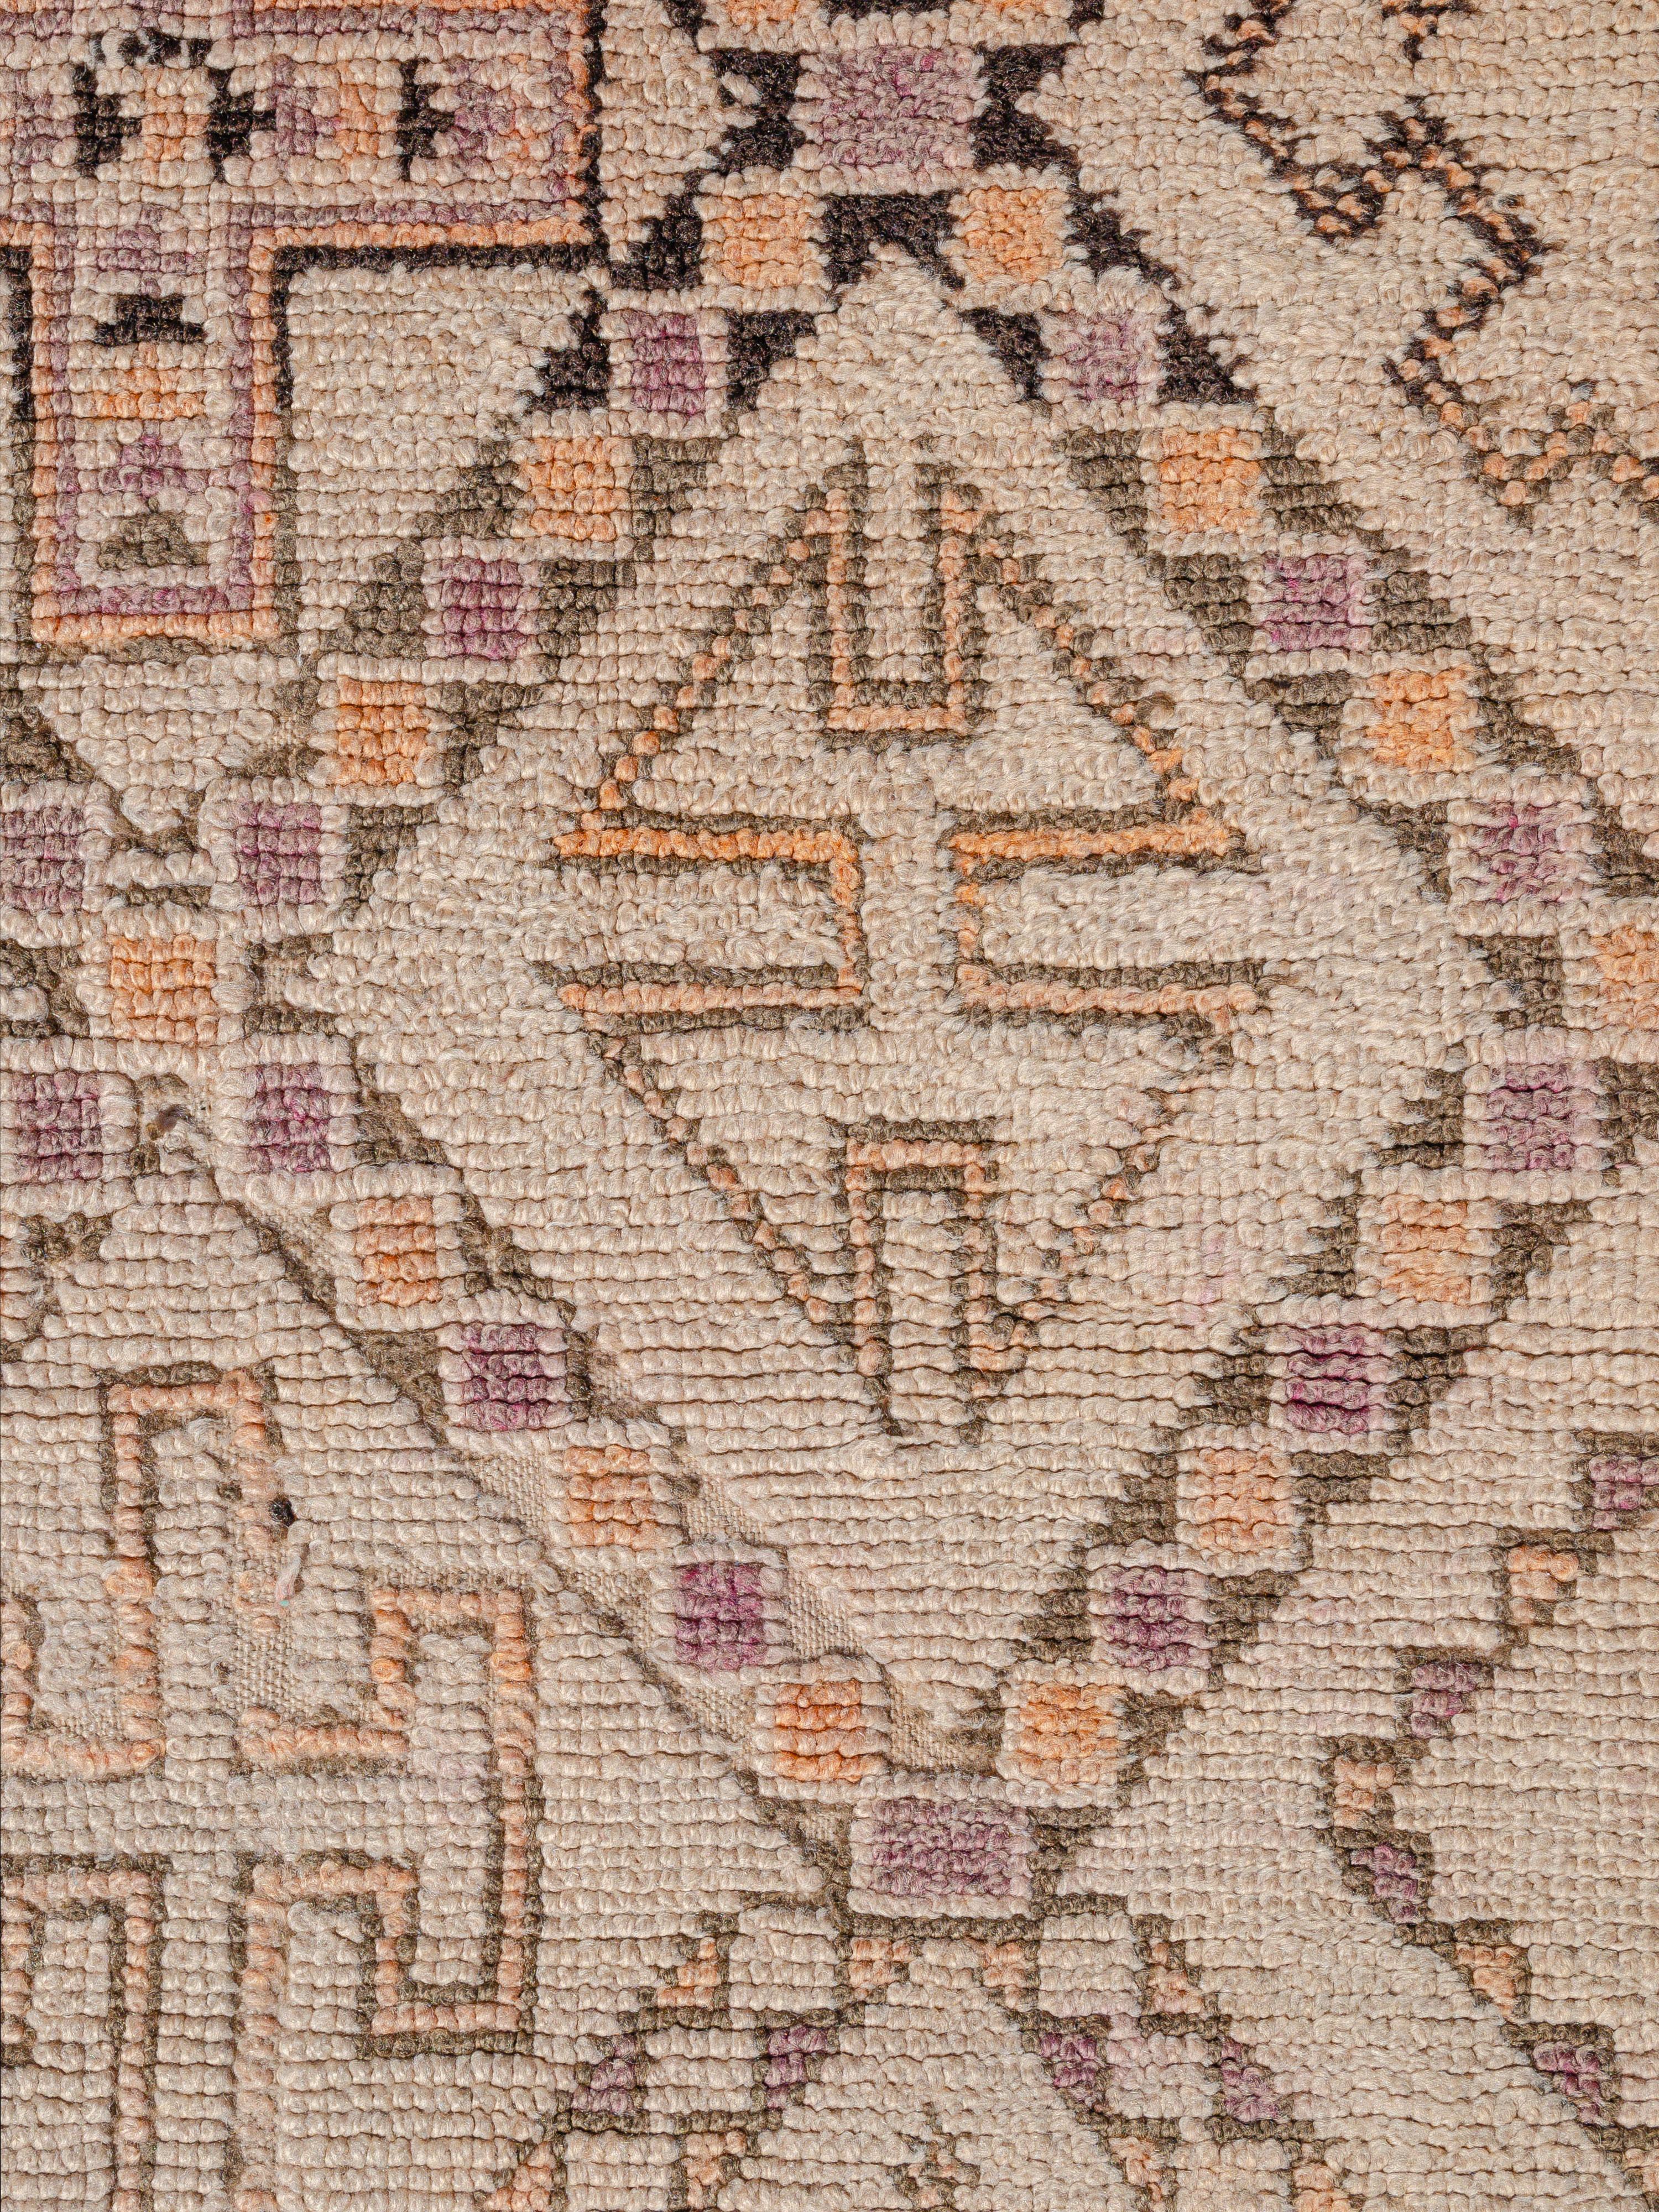 An ornate vintage Beni Ouarain featuring a belted lozenge network filled with an array of both traditional and abstracted motifs. While some classic forms are easy to decipher, others are more elusive. The composition is quite symmetrical, though